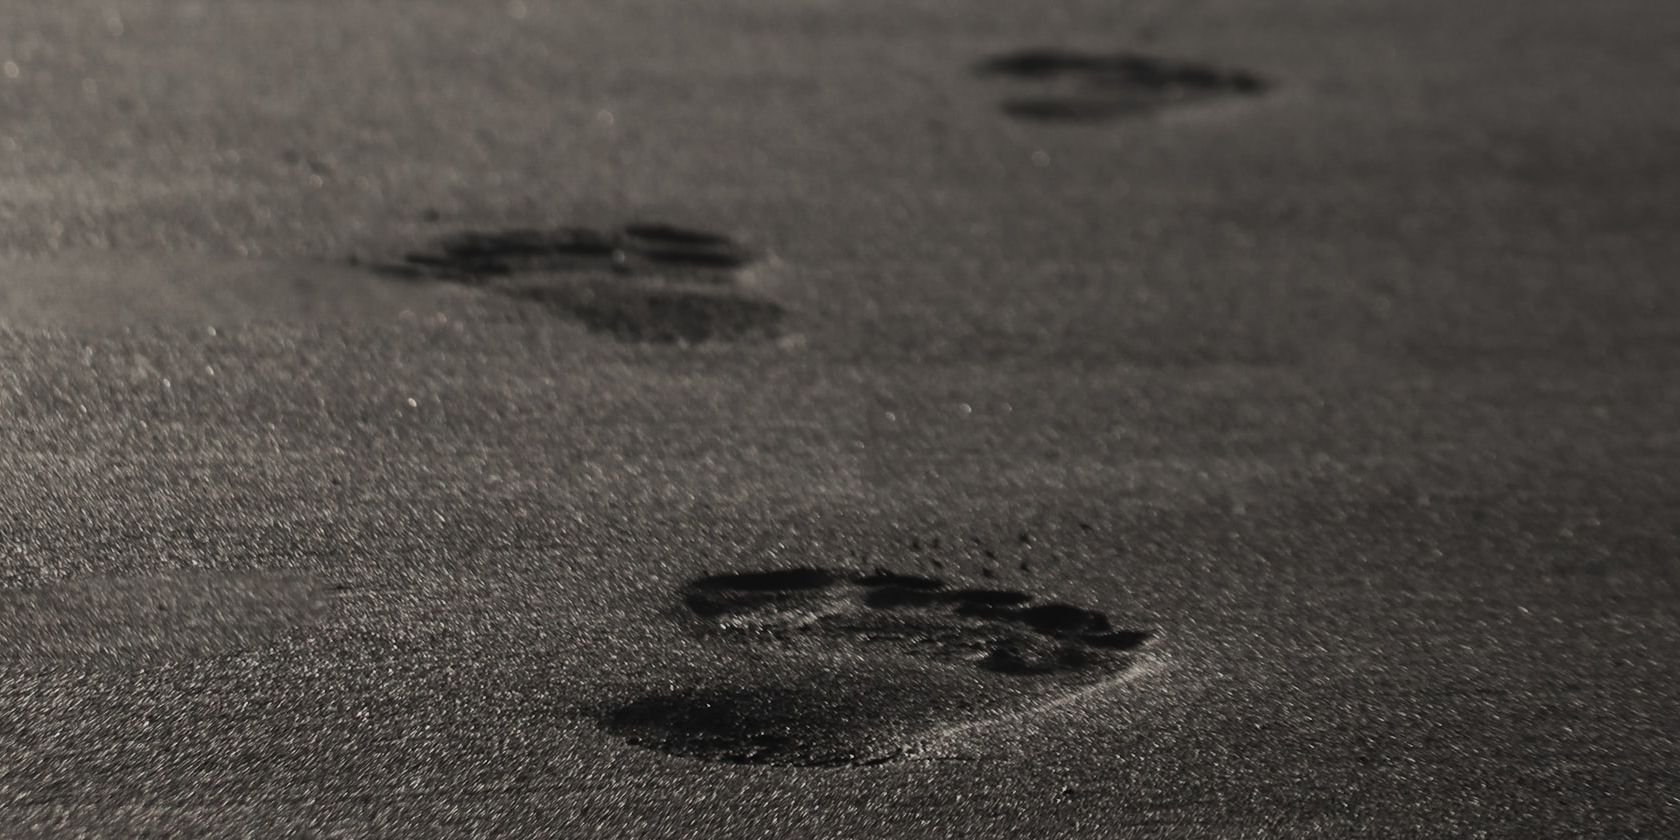 Why You Should Care About the Tracks Left By Your Digital Footprint